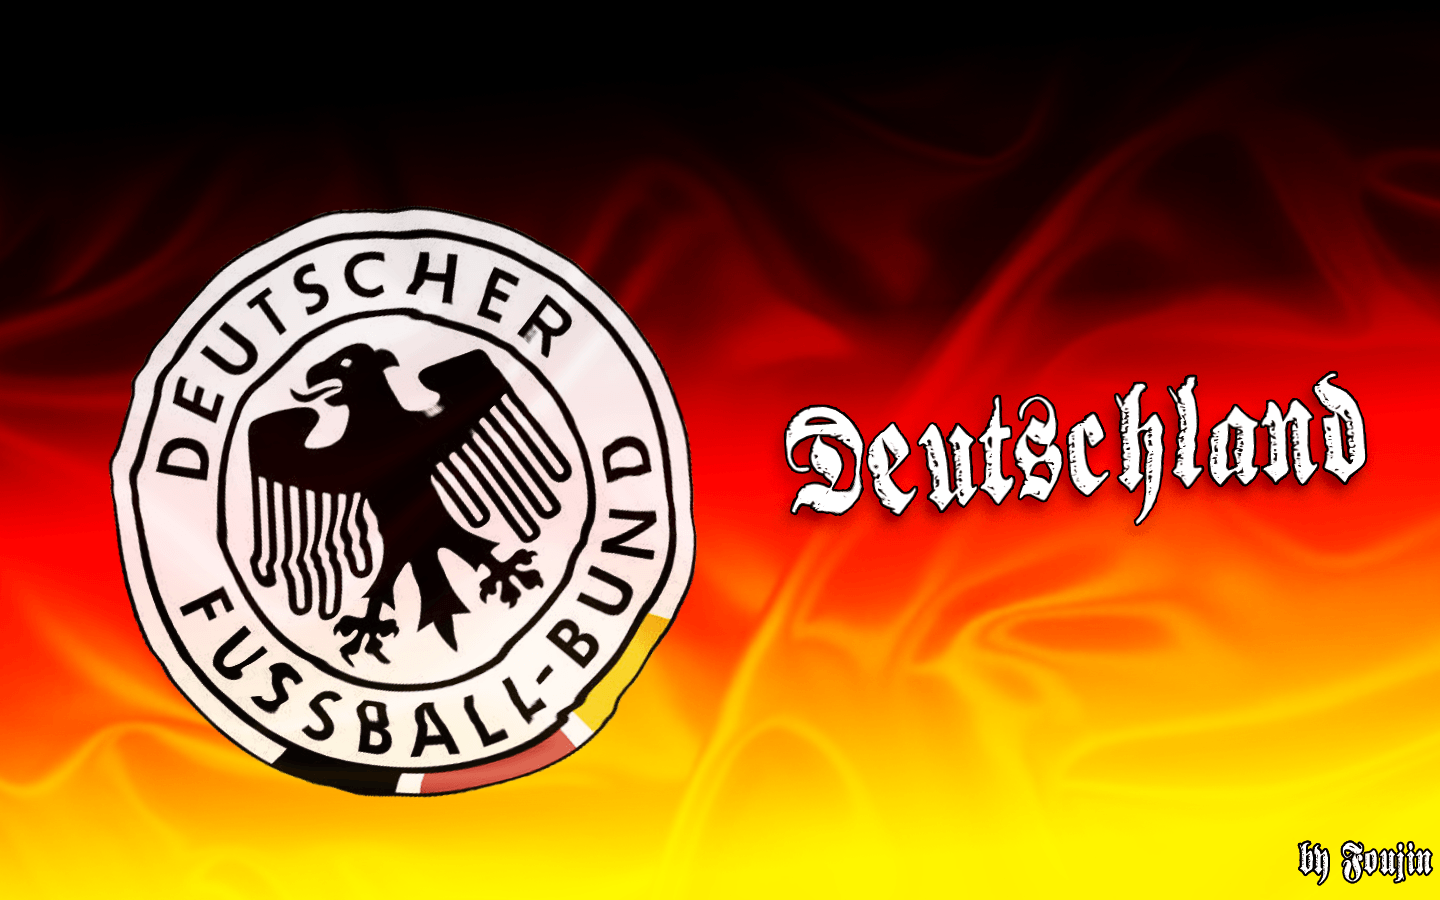 Germany Flag Wallpapers - Wallpaper Cave